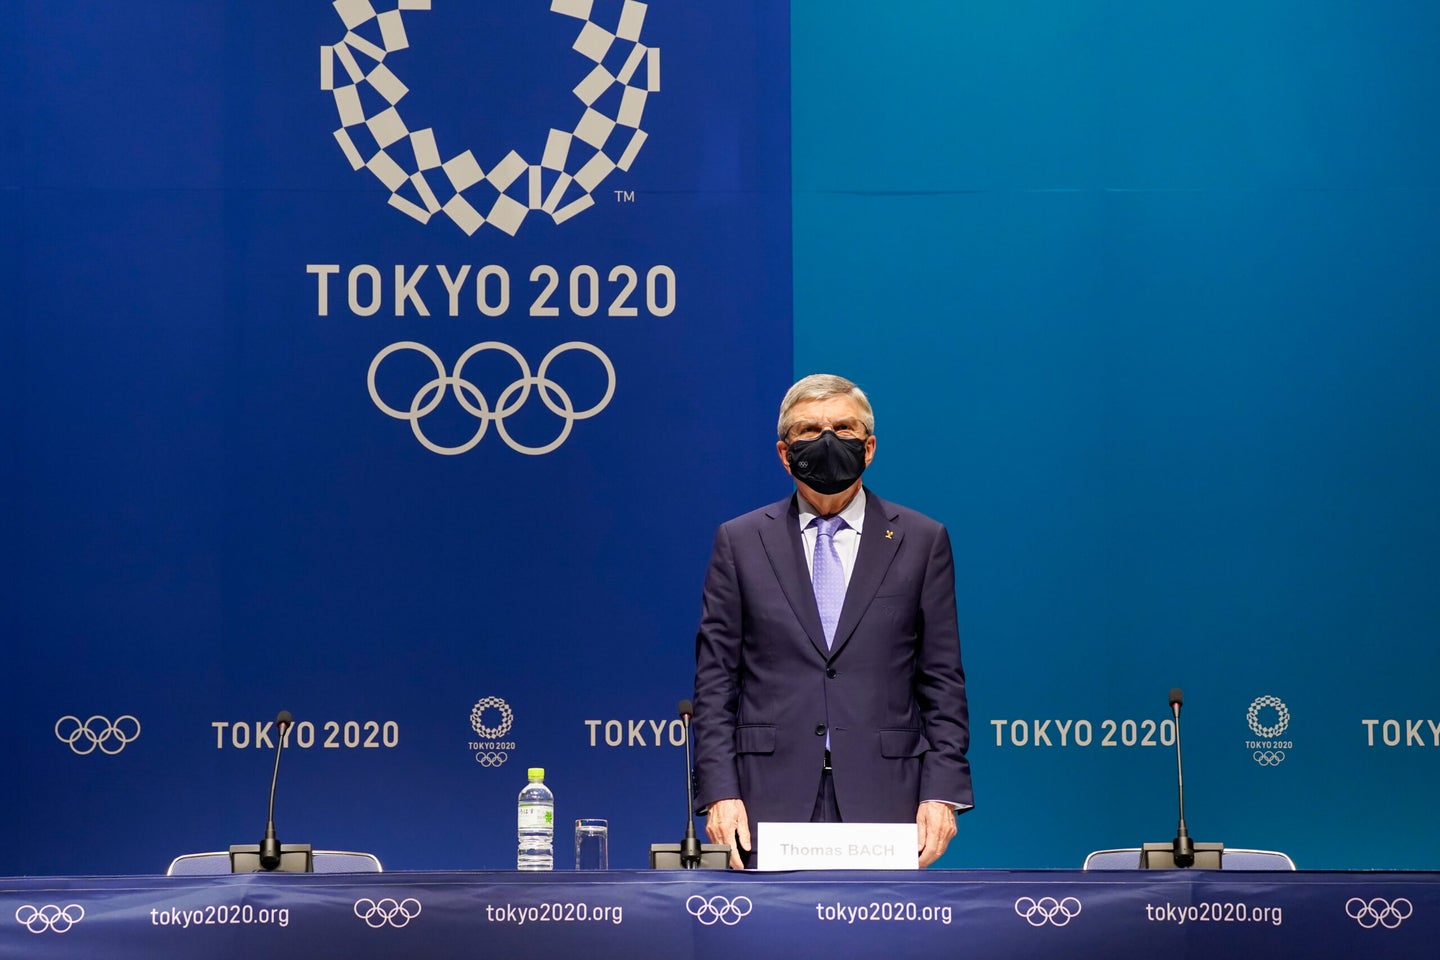 A grey haired man in a dark suit, wearing a black mask stands in from of a two-toned blue background and behind a long table set up with three microphones and chairs. The background says "Tokyo 2020" in large white letters and displays the Olympic logo.